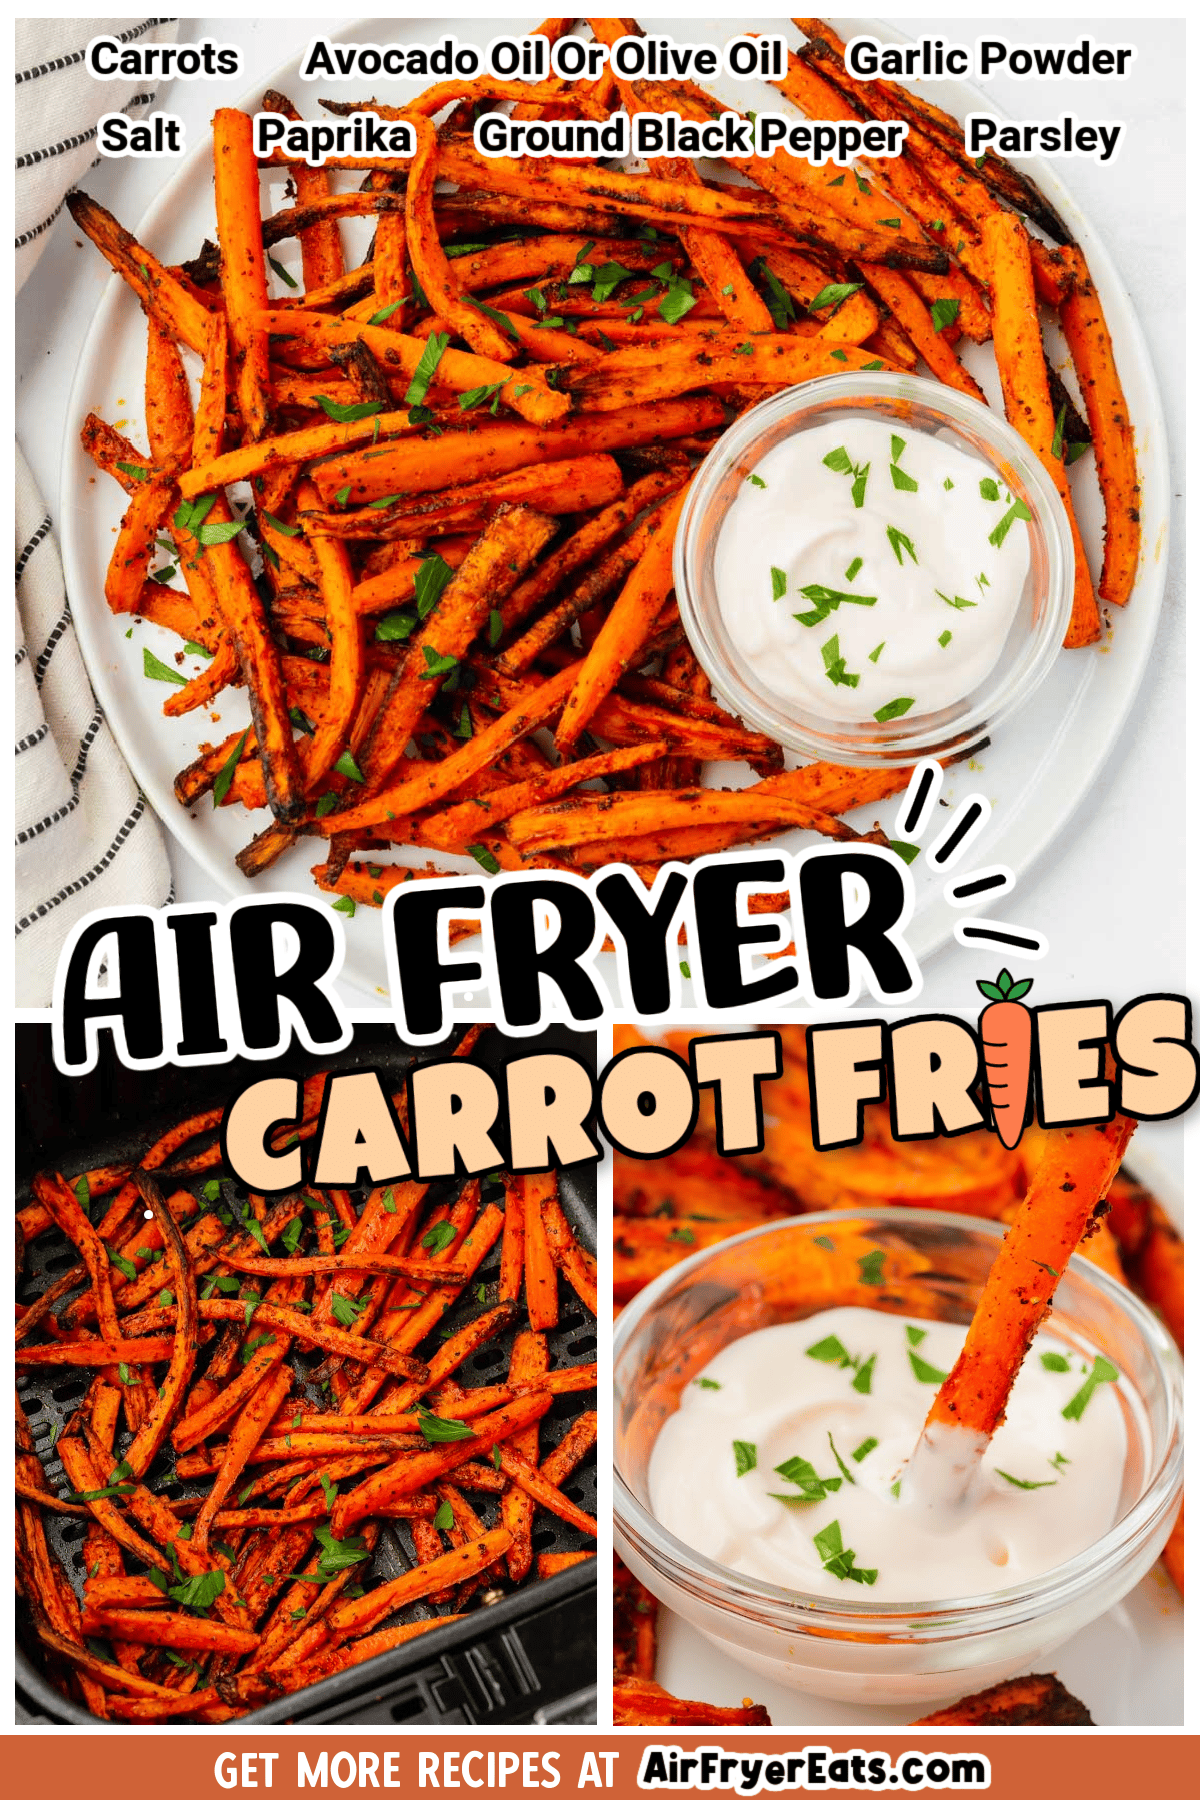 Crispy Air Fryer Carrot Fries are a healthy alternative to potatoes, and ridiculously delicious! It's easy to make carrot fries in the air fryer in under 20 minutes. via @vegetarianmamma